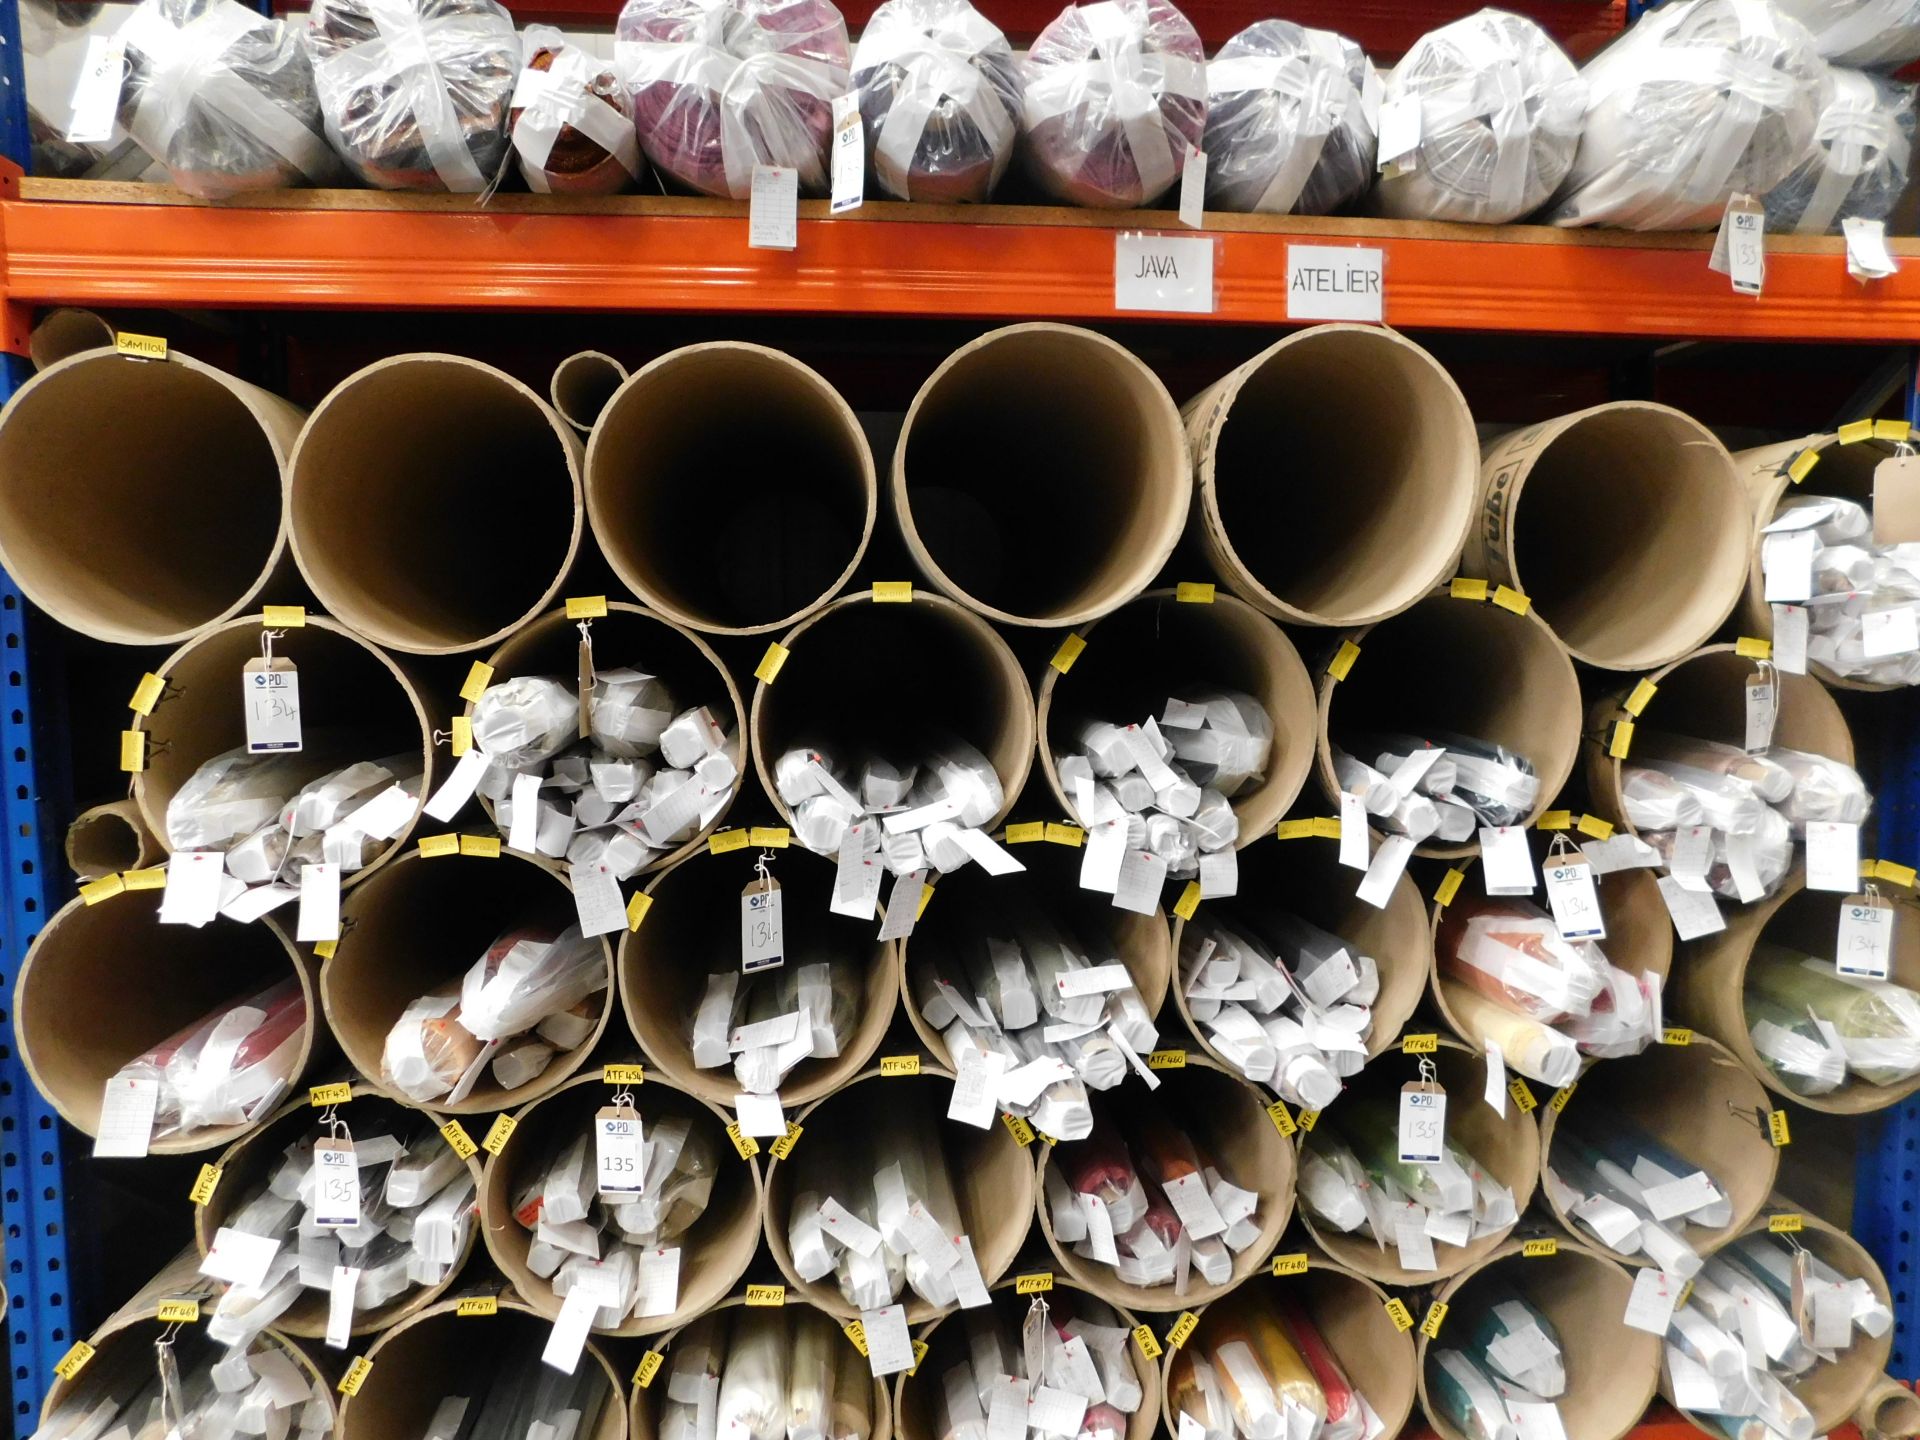 Approximately 670 Metres of Java Fabrics (See Image for Stock Break Down – Please Note, not